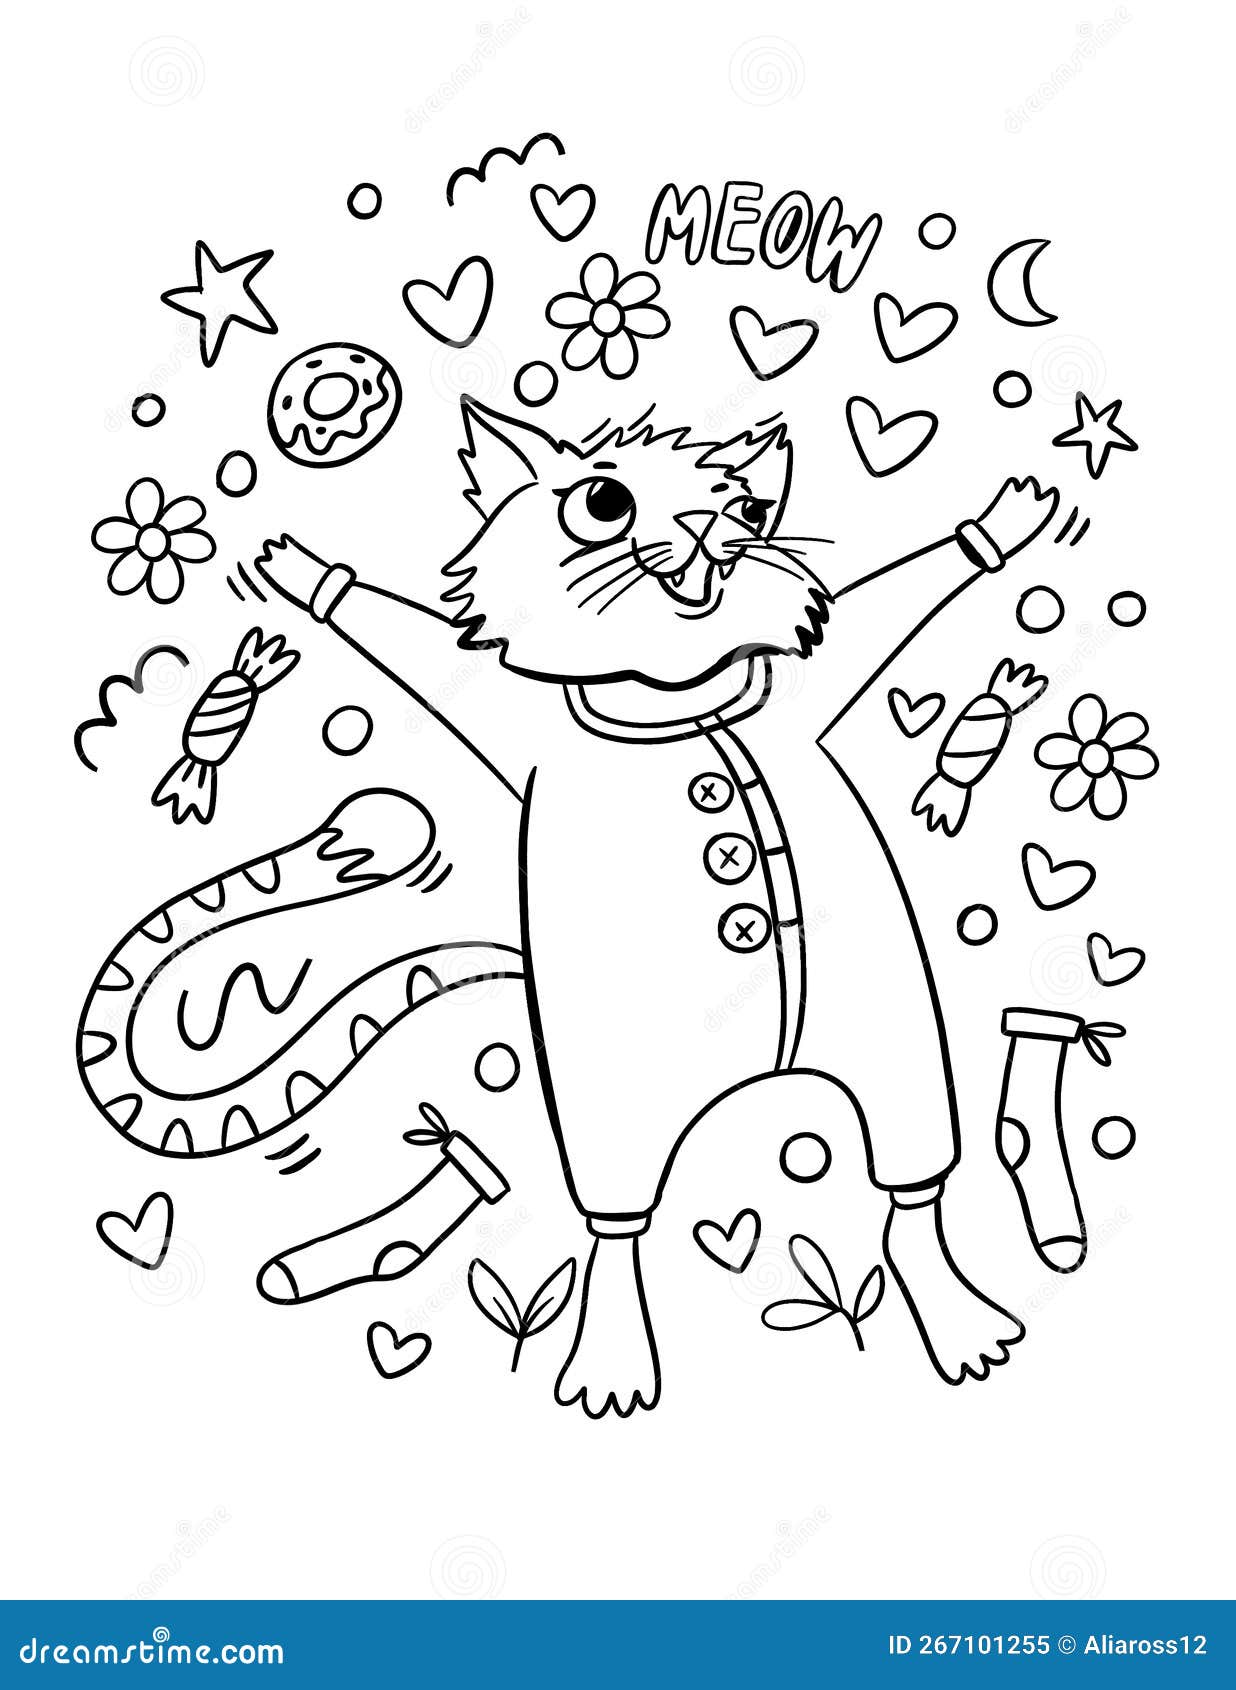 Line art coloring page on white backdrop zoo collection children education hand drawing animal animal print creative design stock illustration